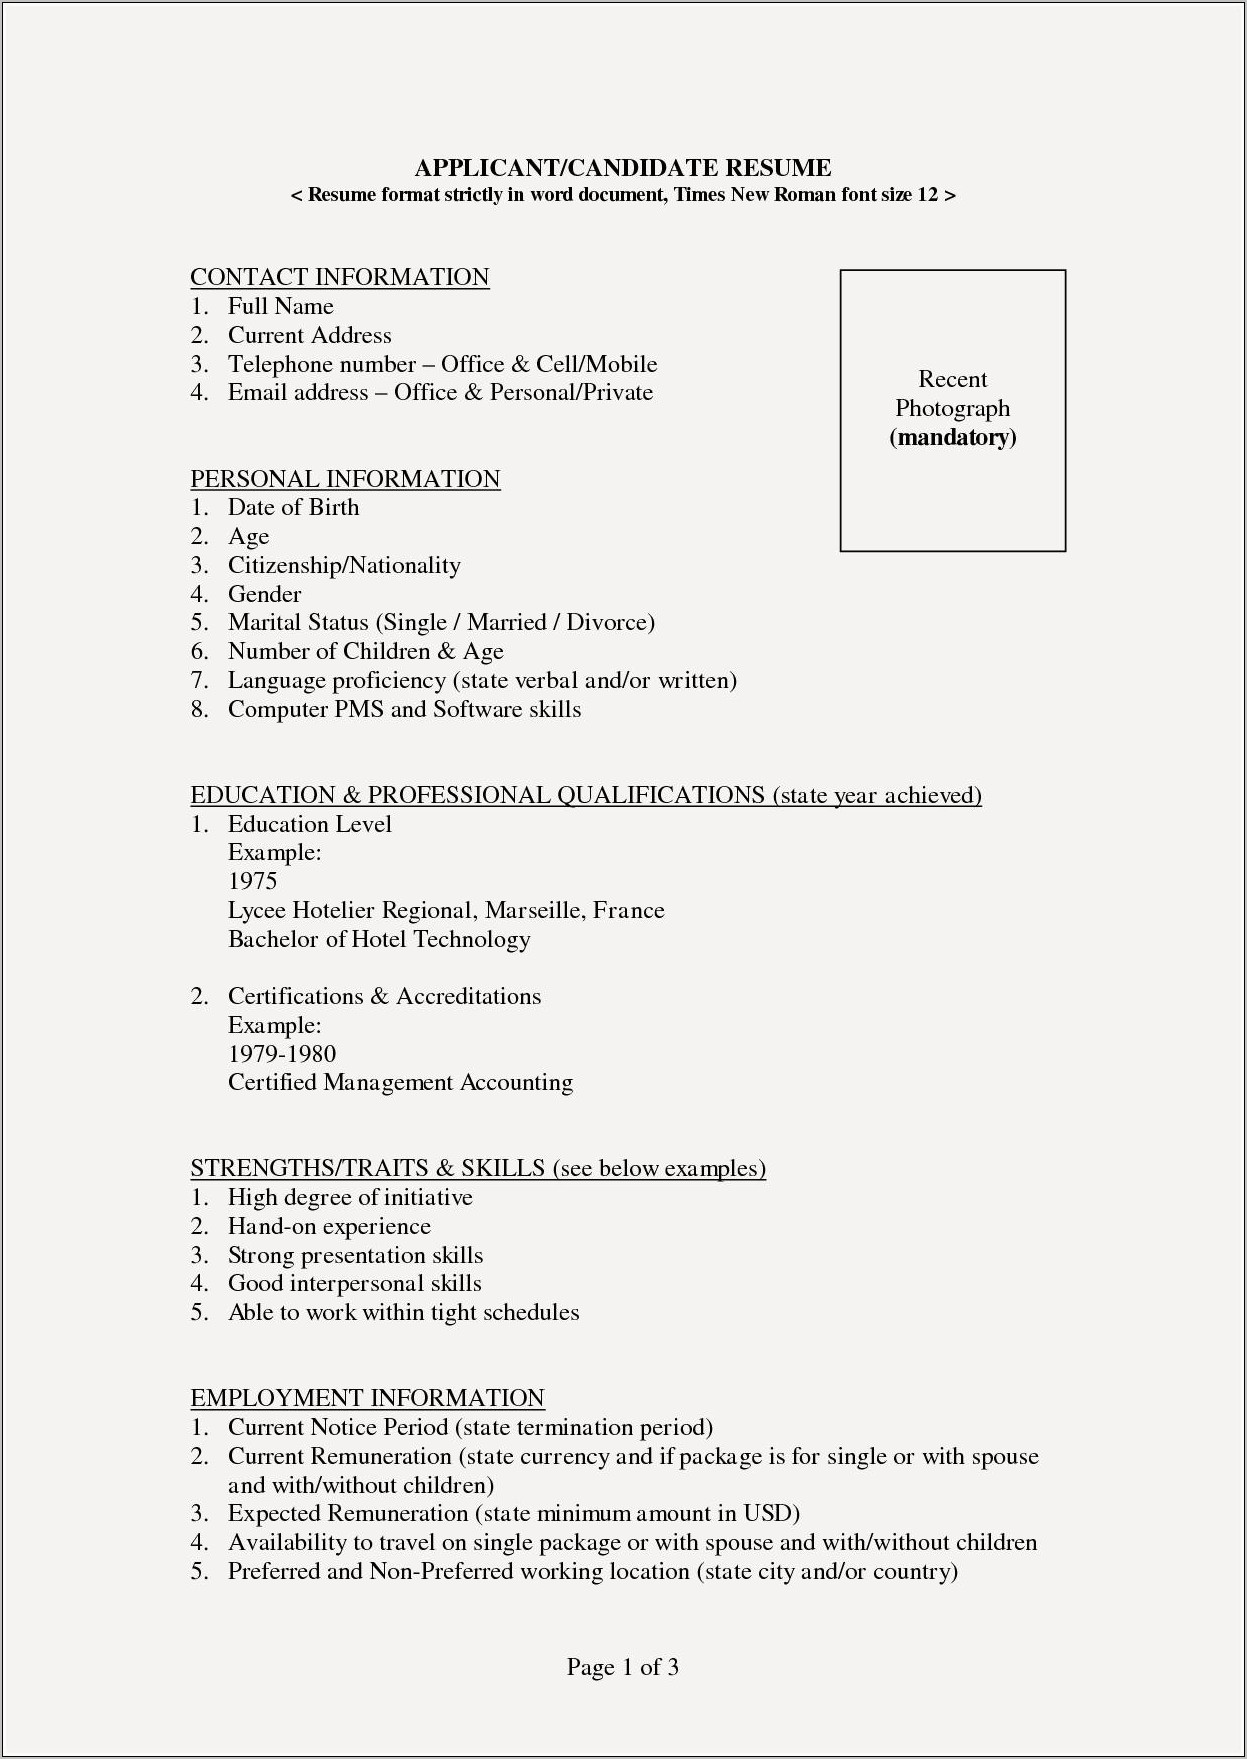 Can I View Resume Samples On Microsoft Work